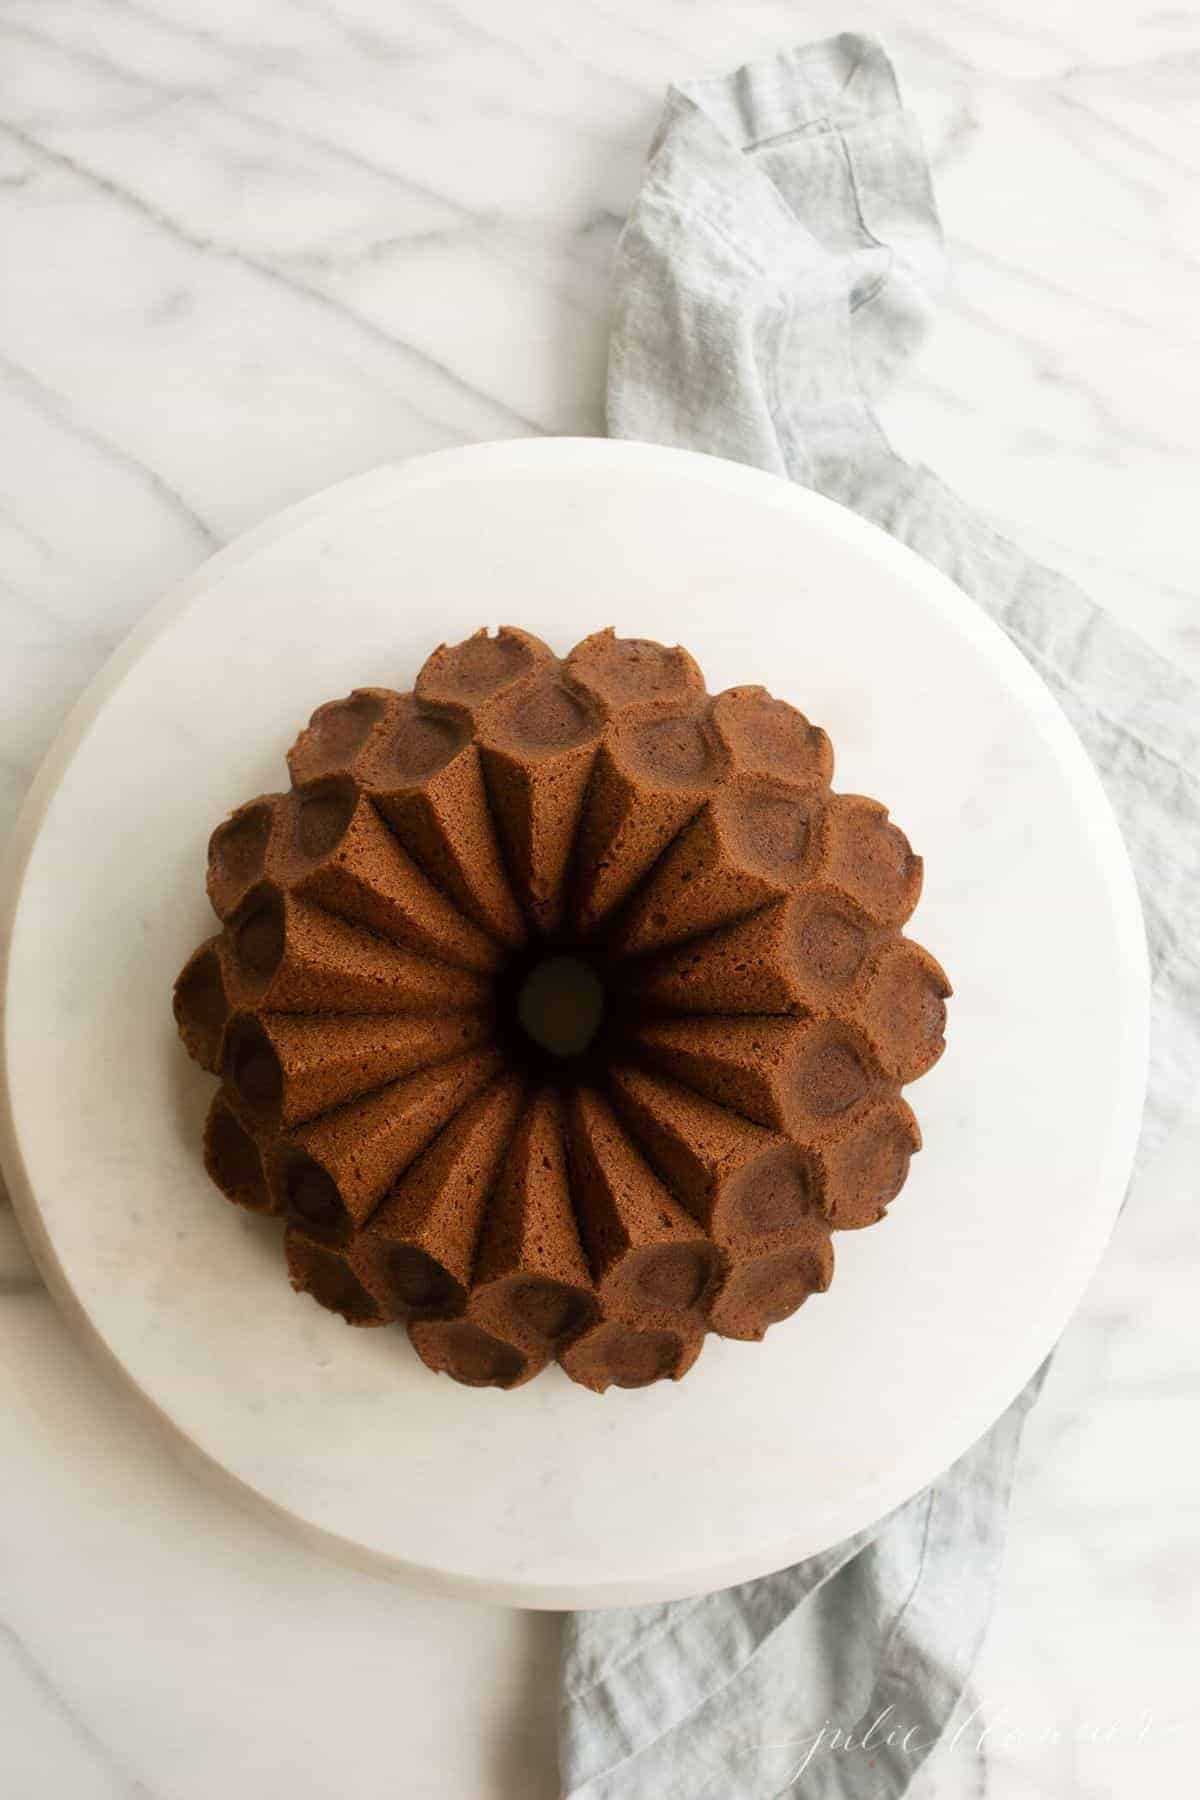 Looking down onto a bundt cake, placed on a marble platter.